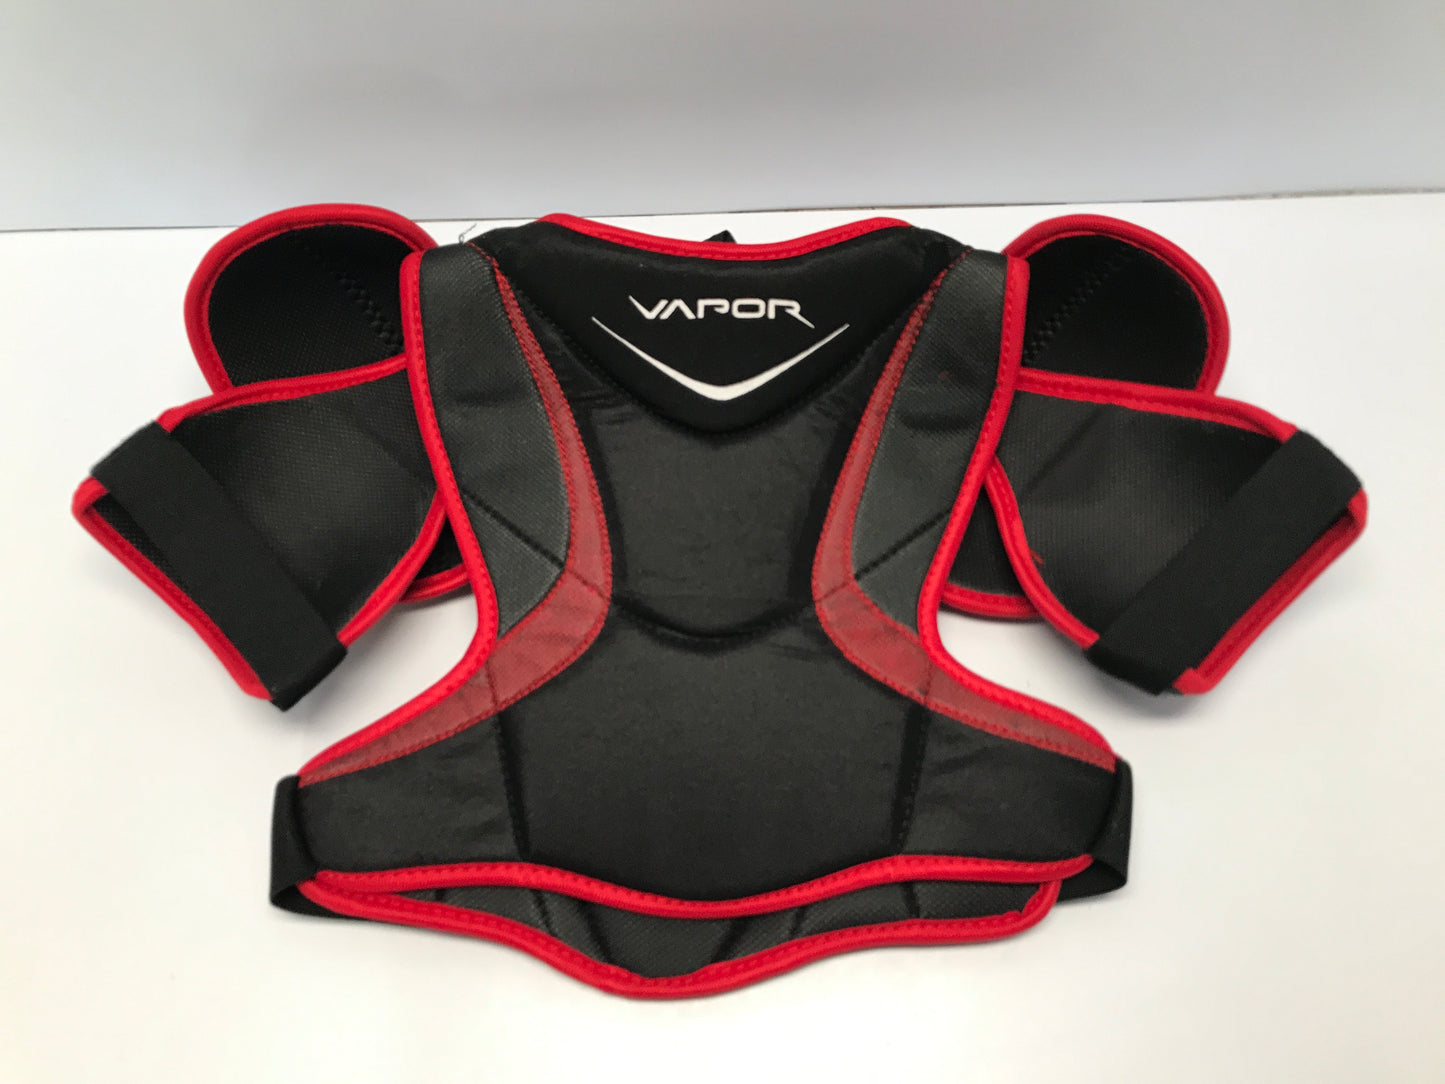 Hockey Shoulder Chest Child Size Junior Large Bauer Vapor X700 Black Red Outstanding Quality